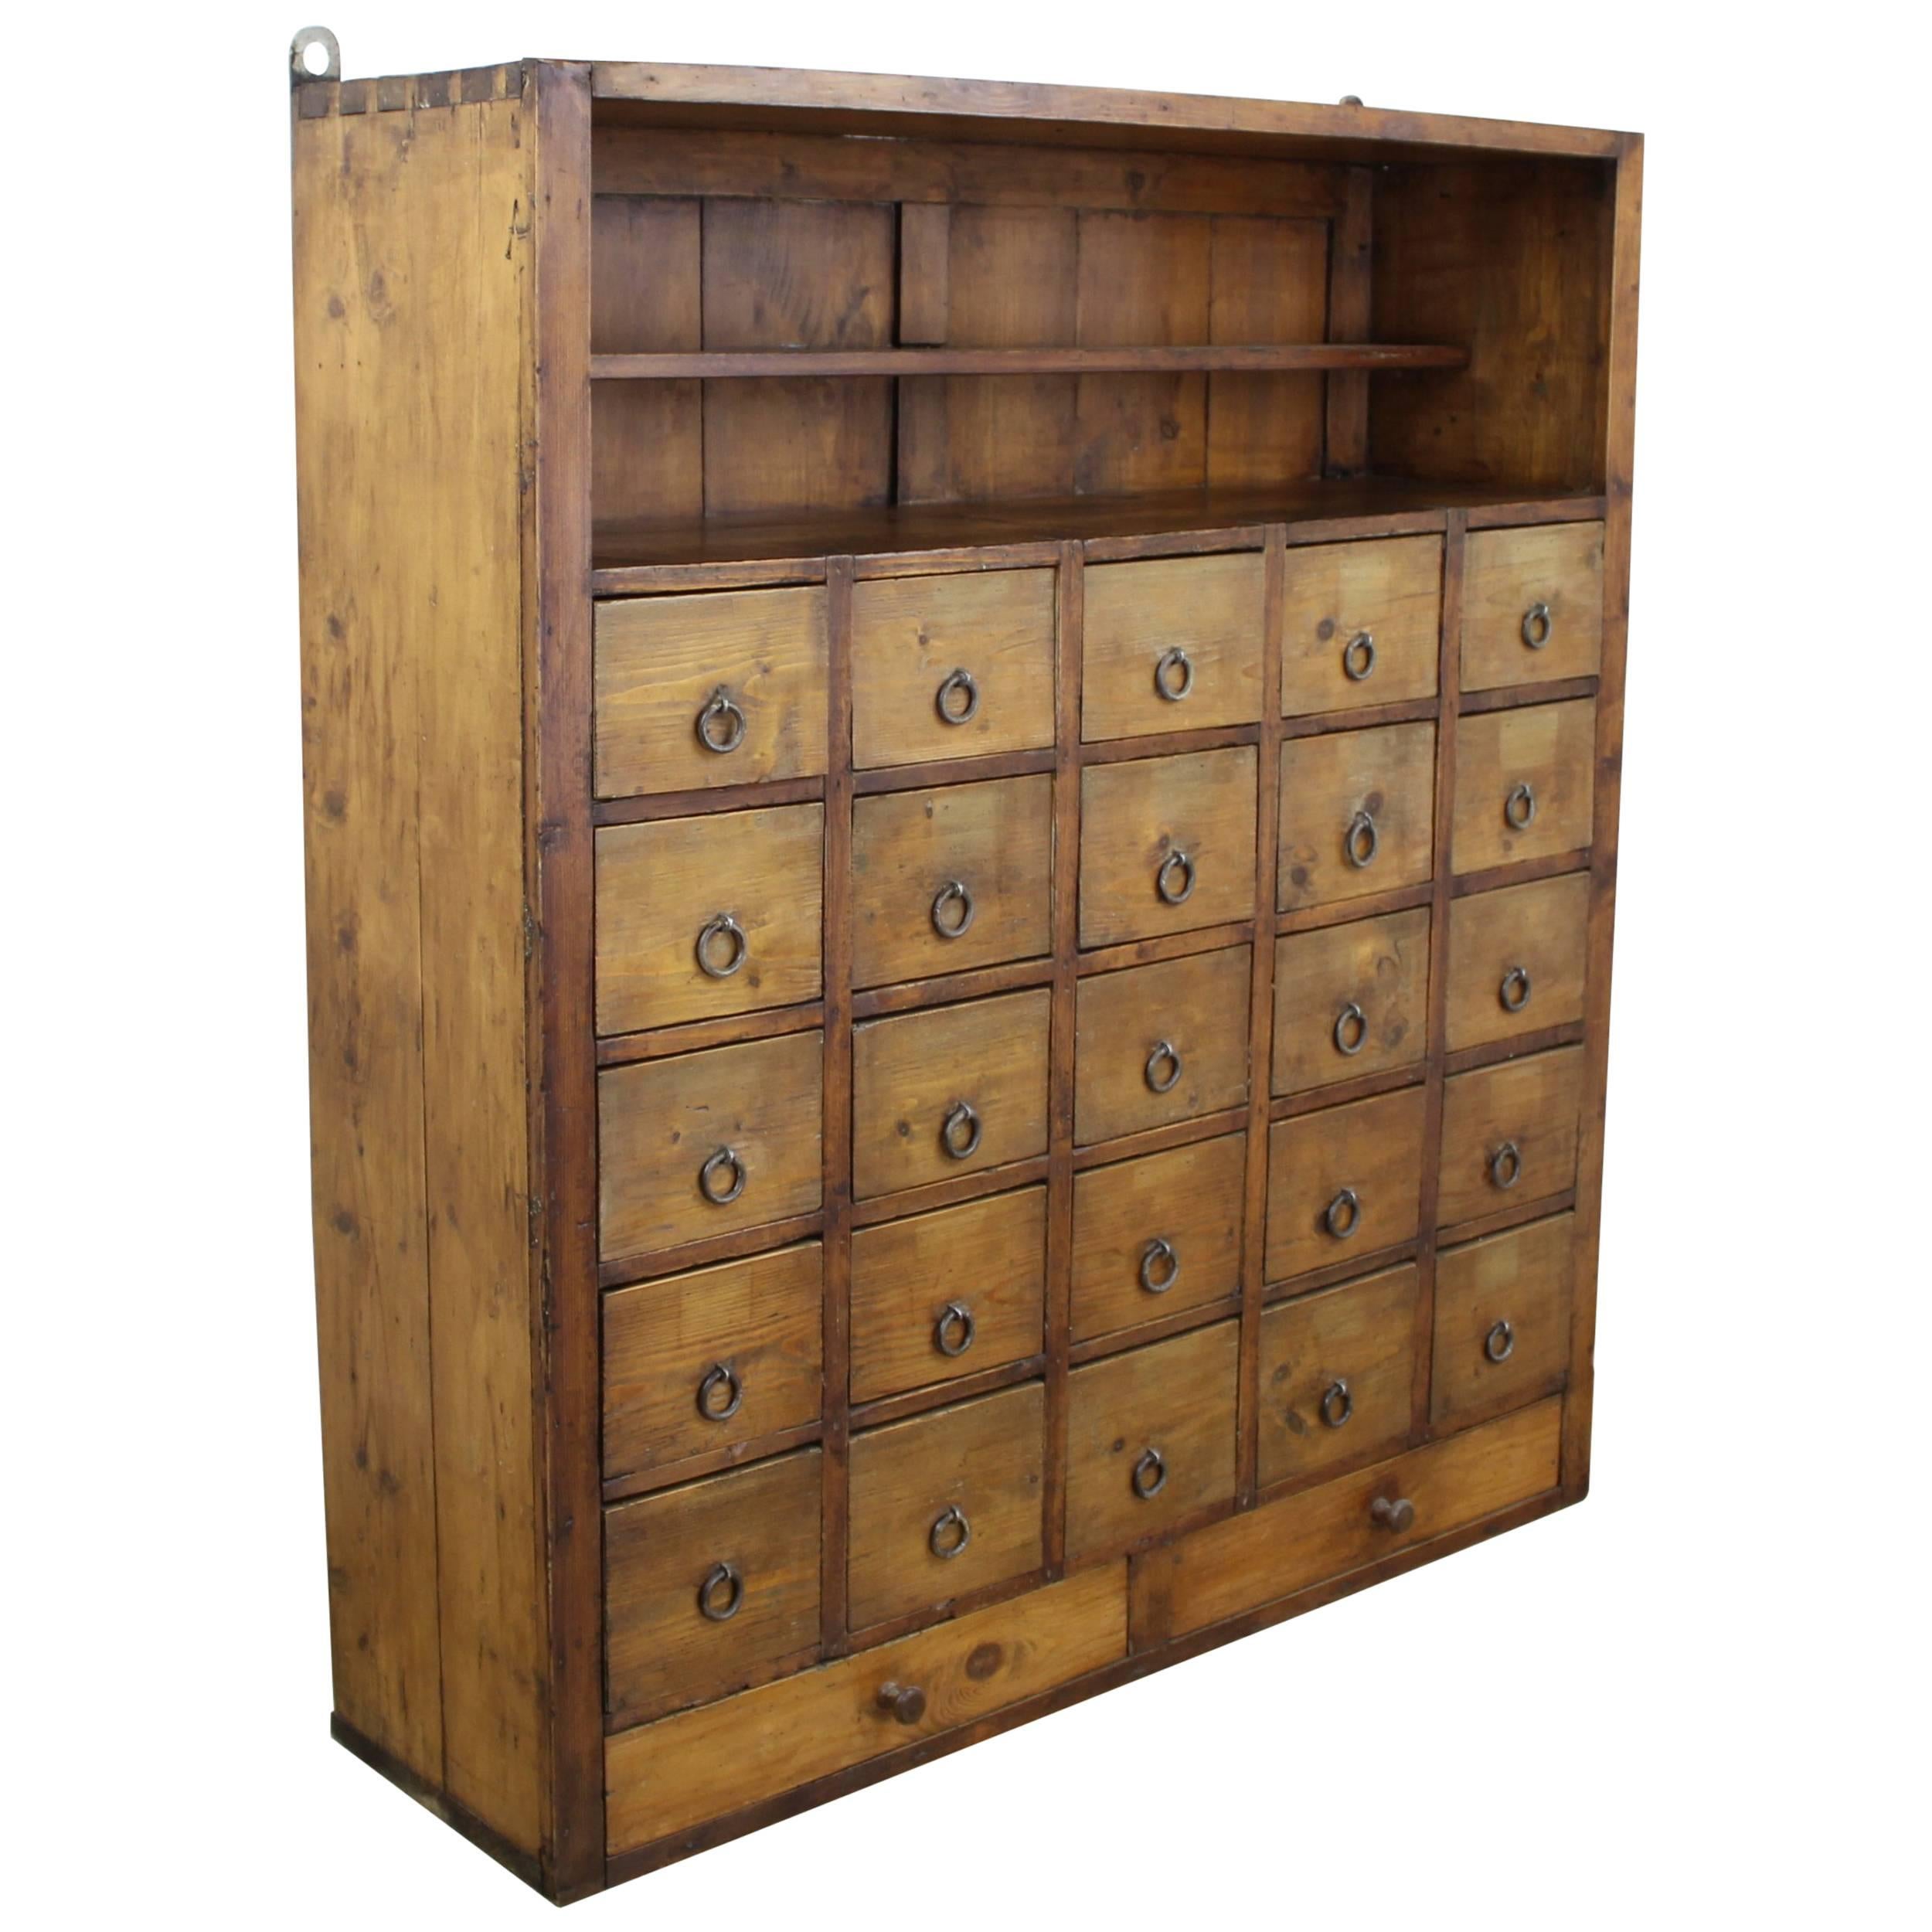 French Antique Bank of Pine Drawers